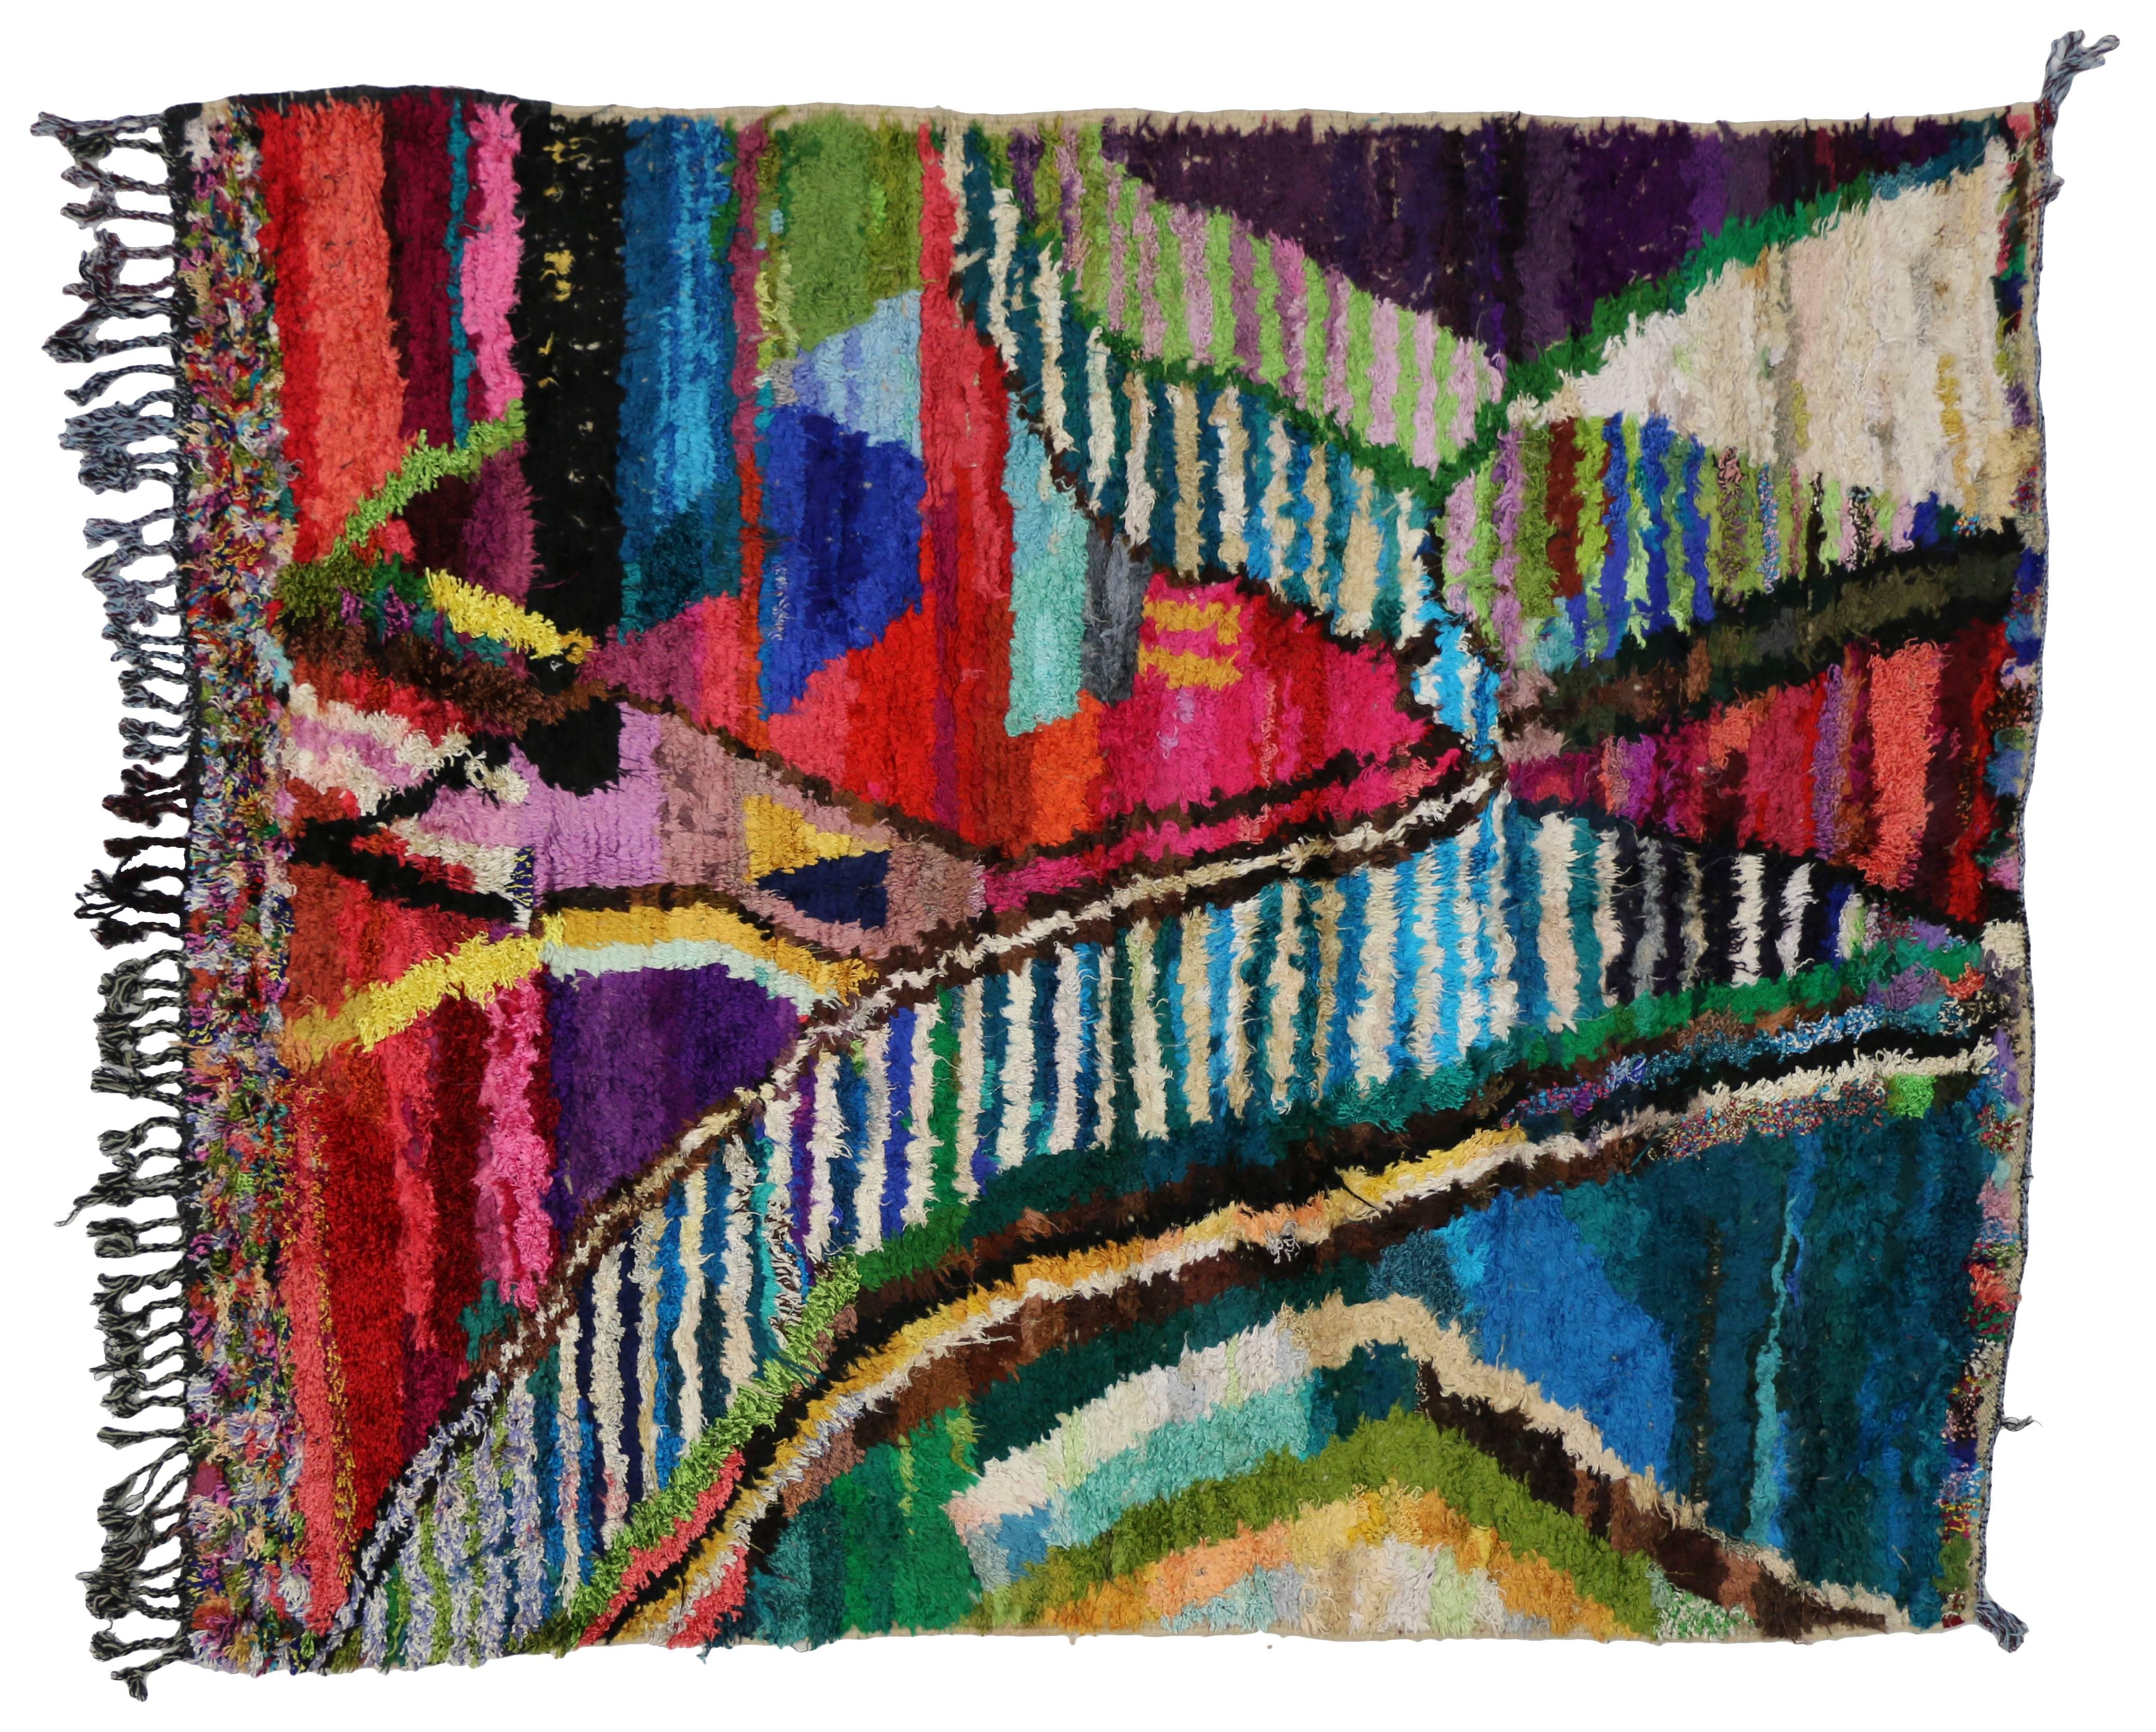 Modern Berber Moroccan Silk Rug with Contemporary Abstract Style 2